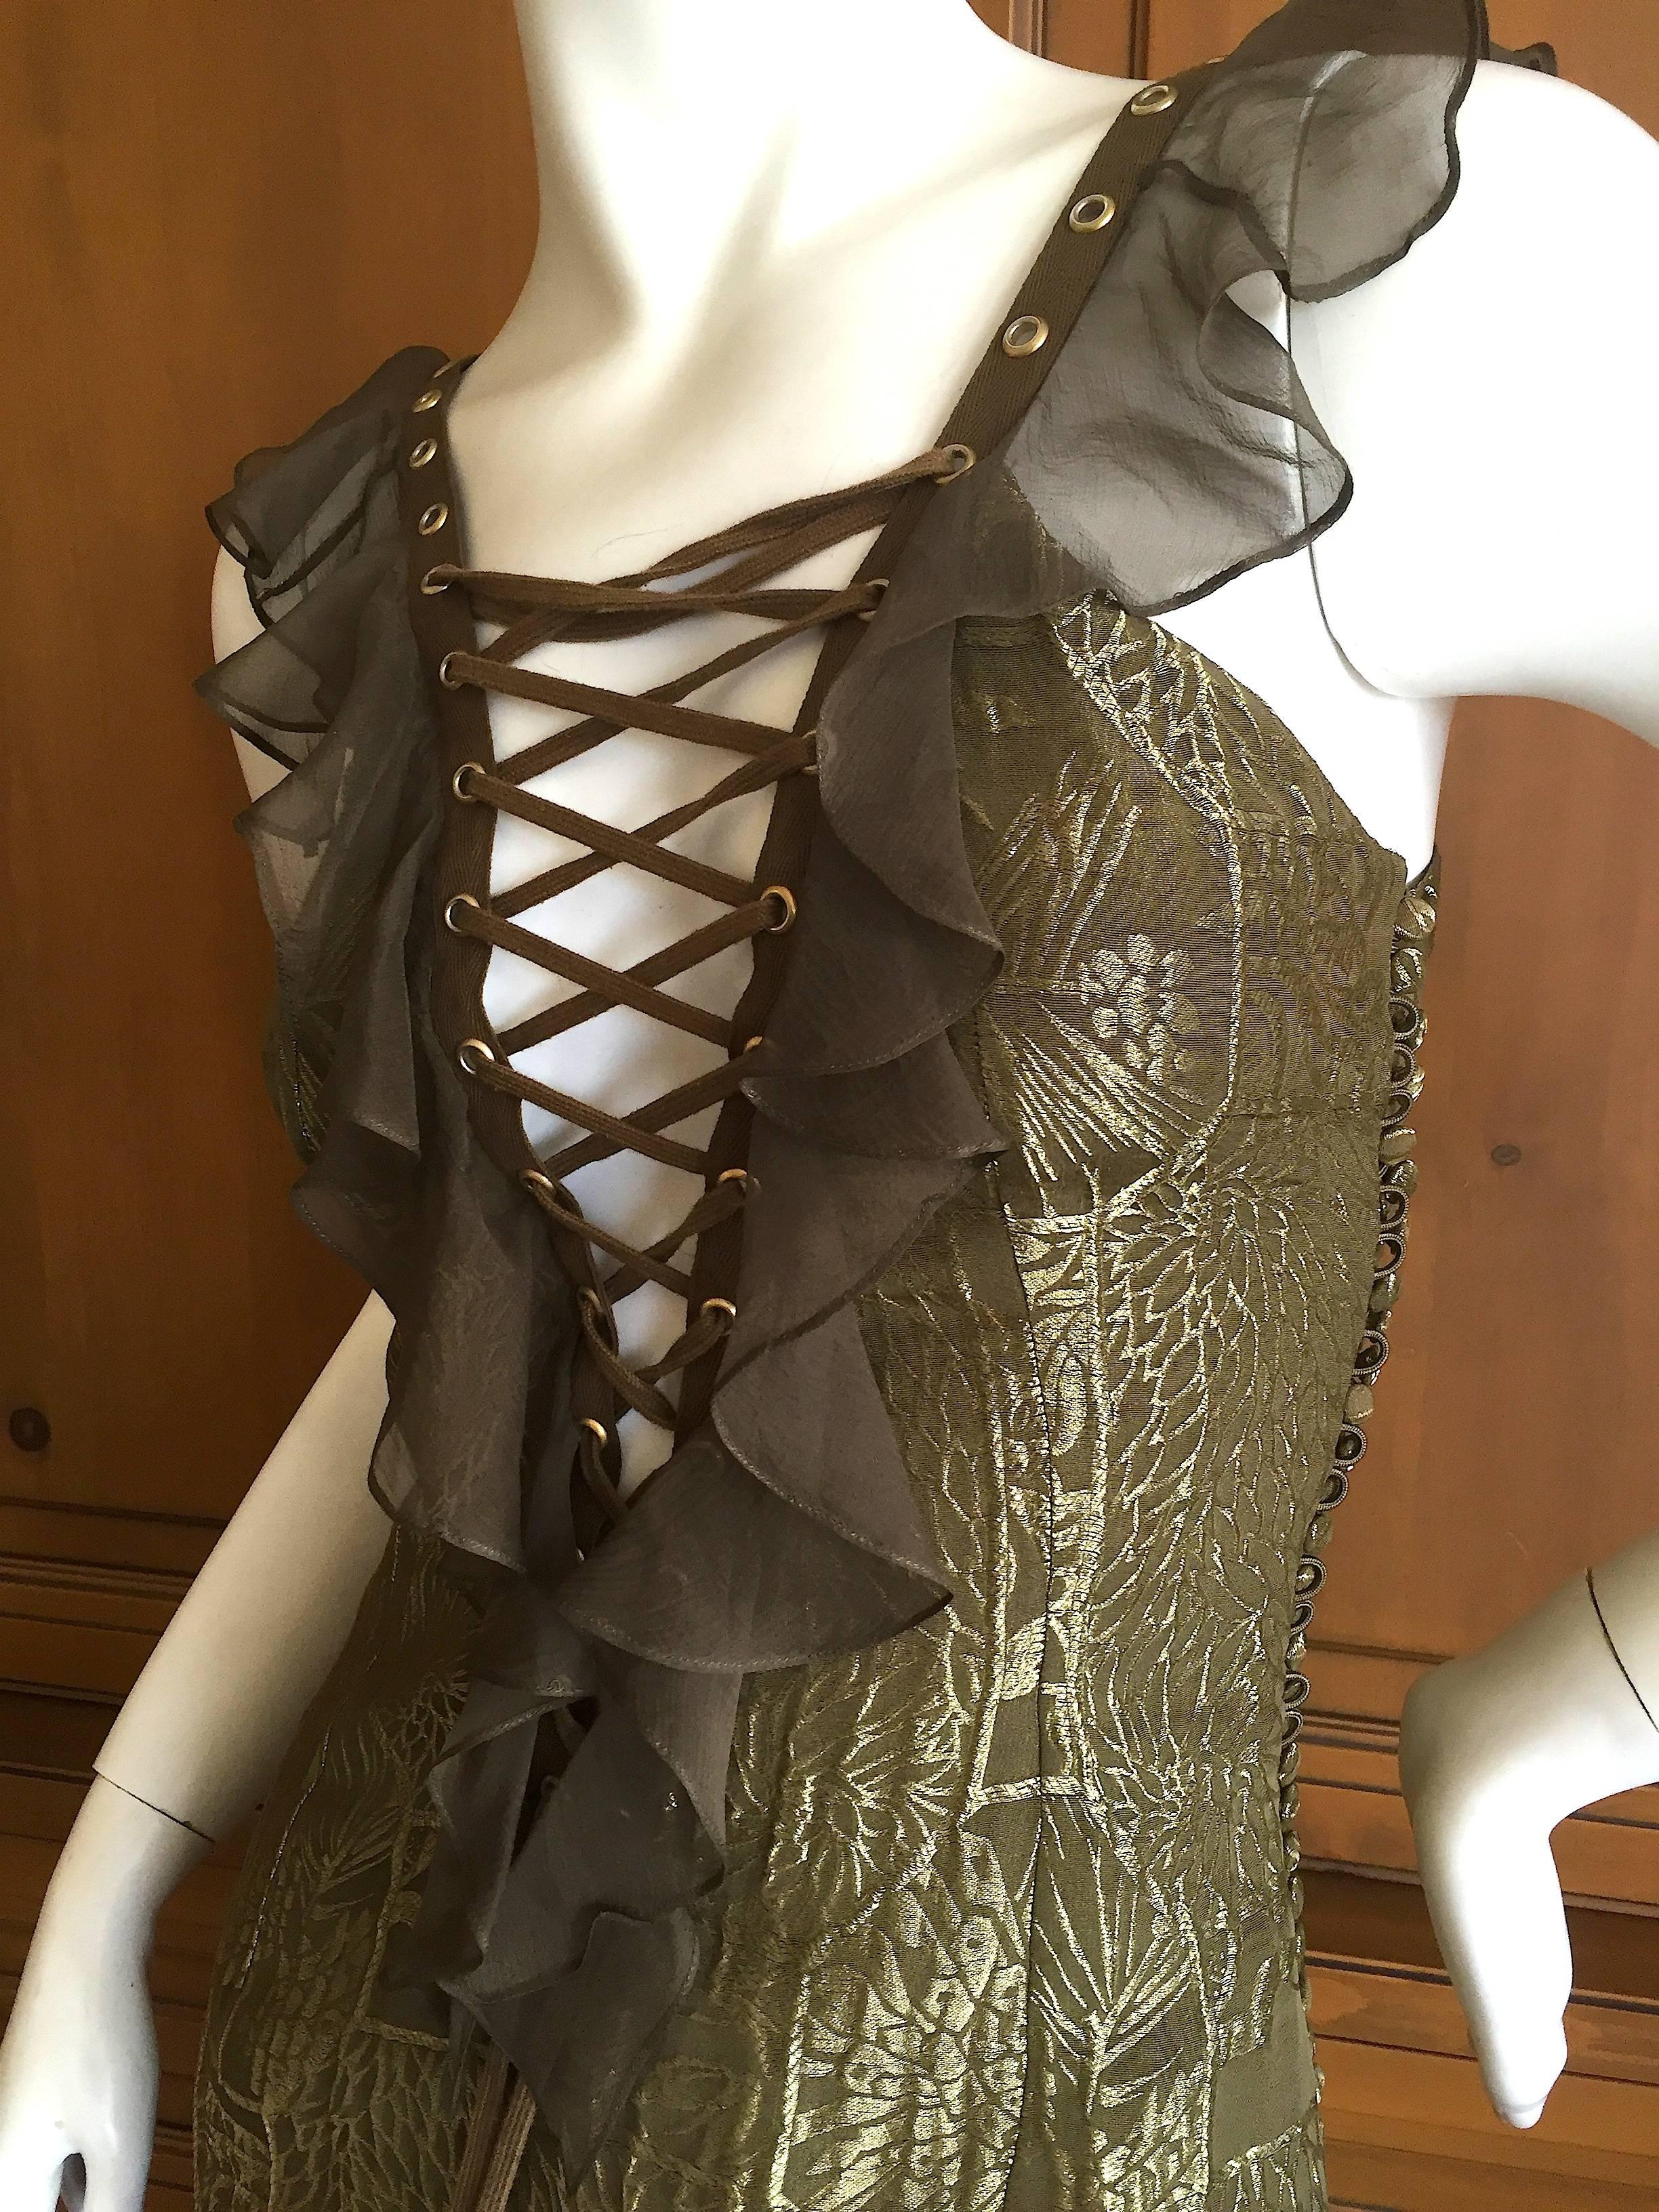 Dior by Galliano Corset Lace Cocktail Dress In Excellent Condition For Sale In Cloverdale, CA